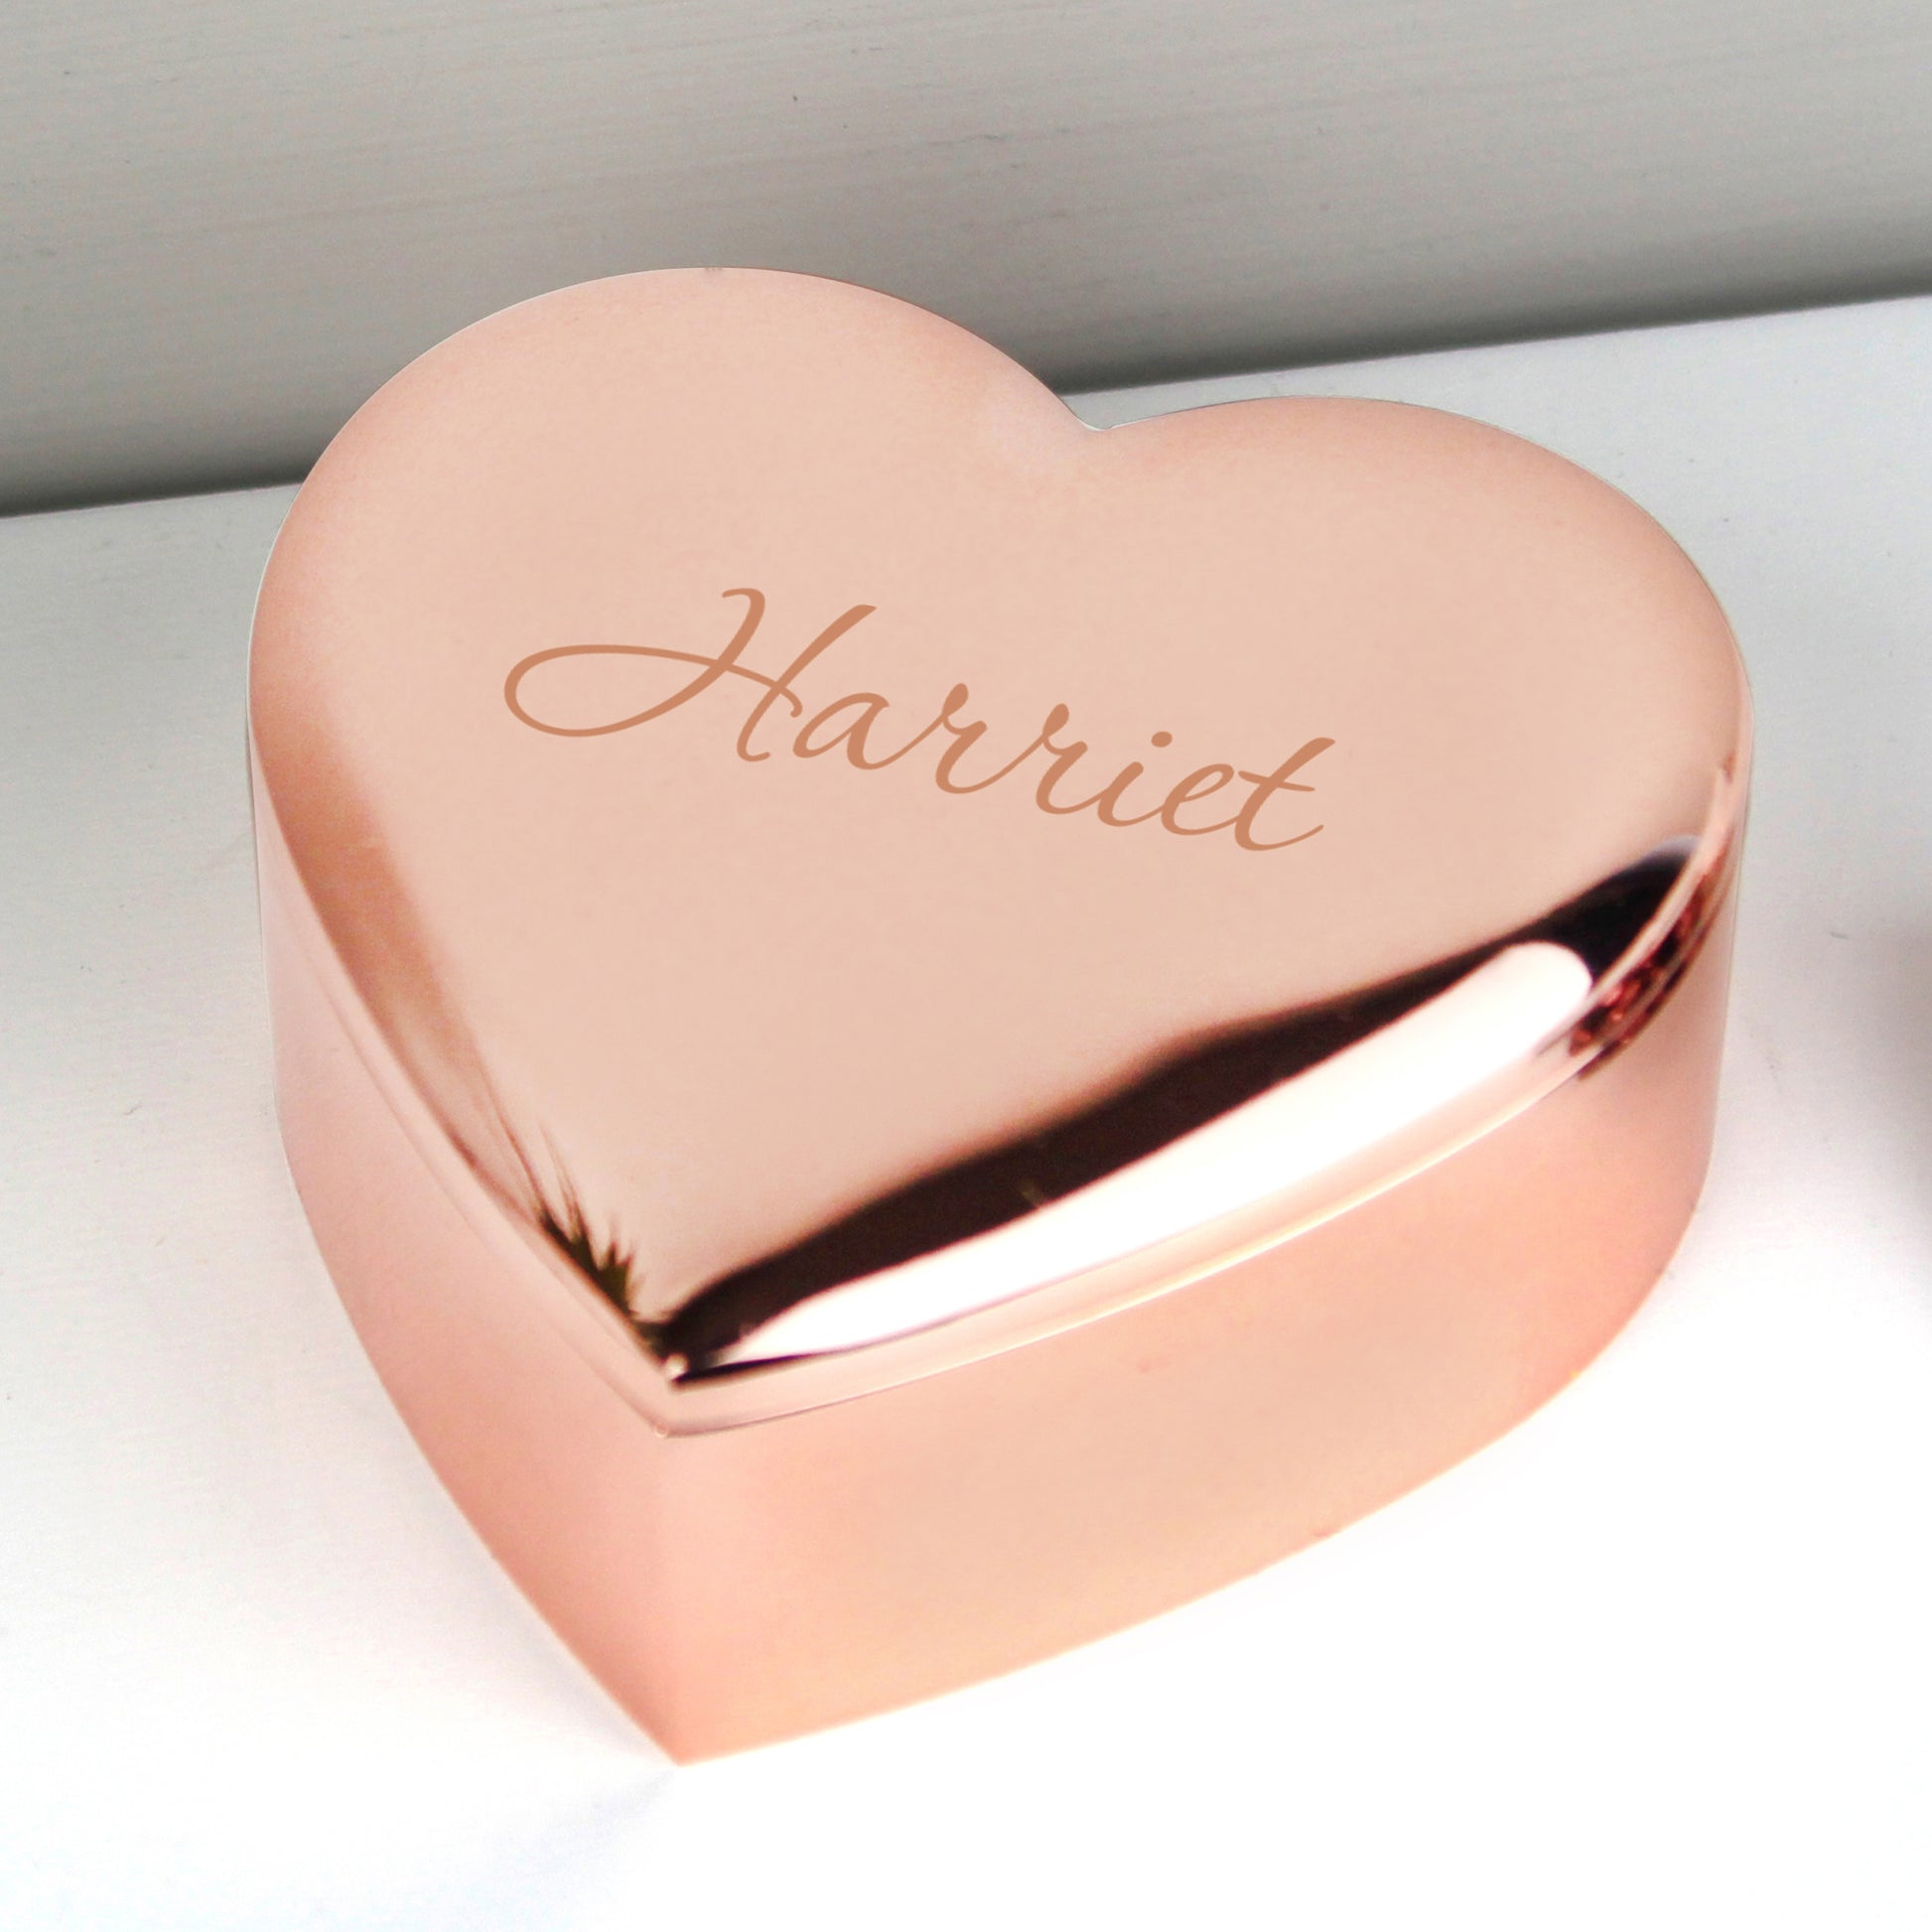 Rose gold heart personalised trinket box - Lilybet loves